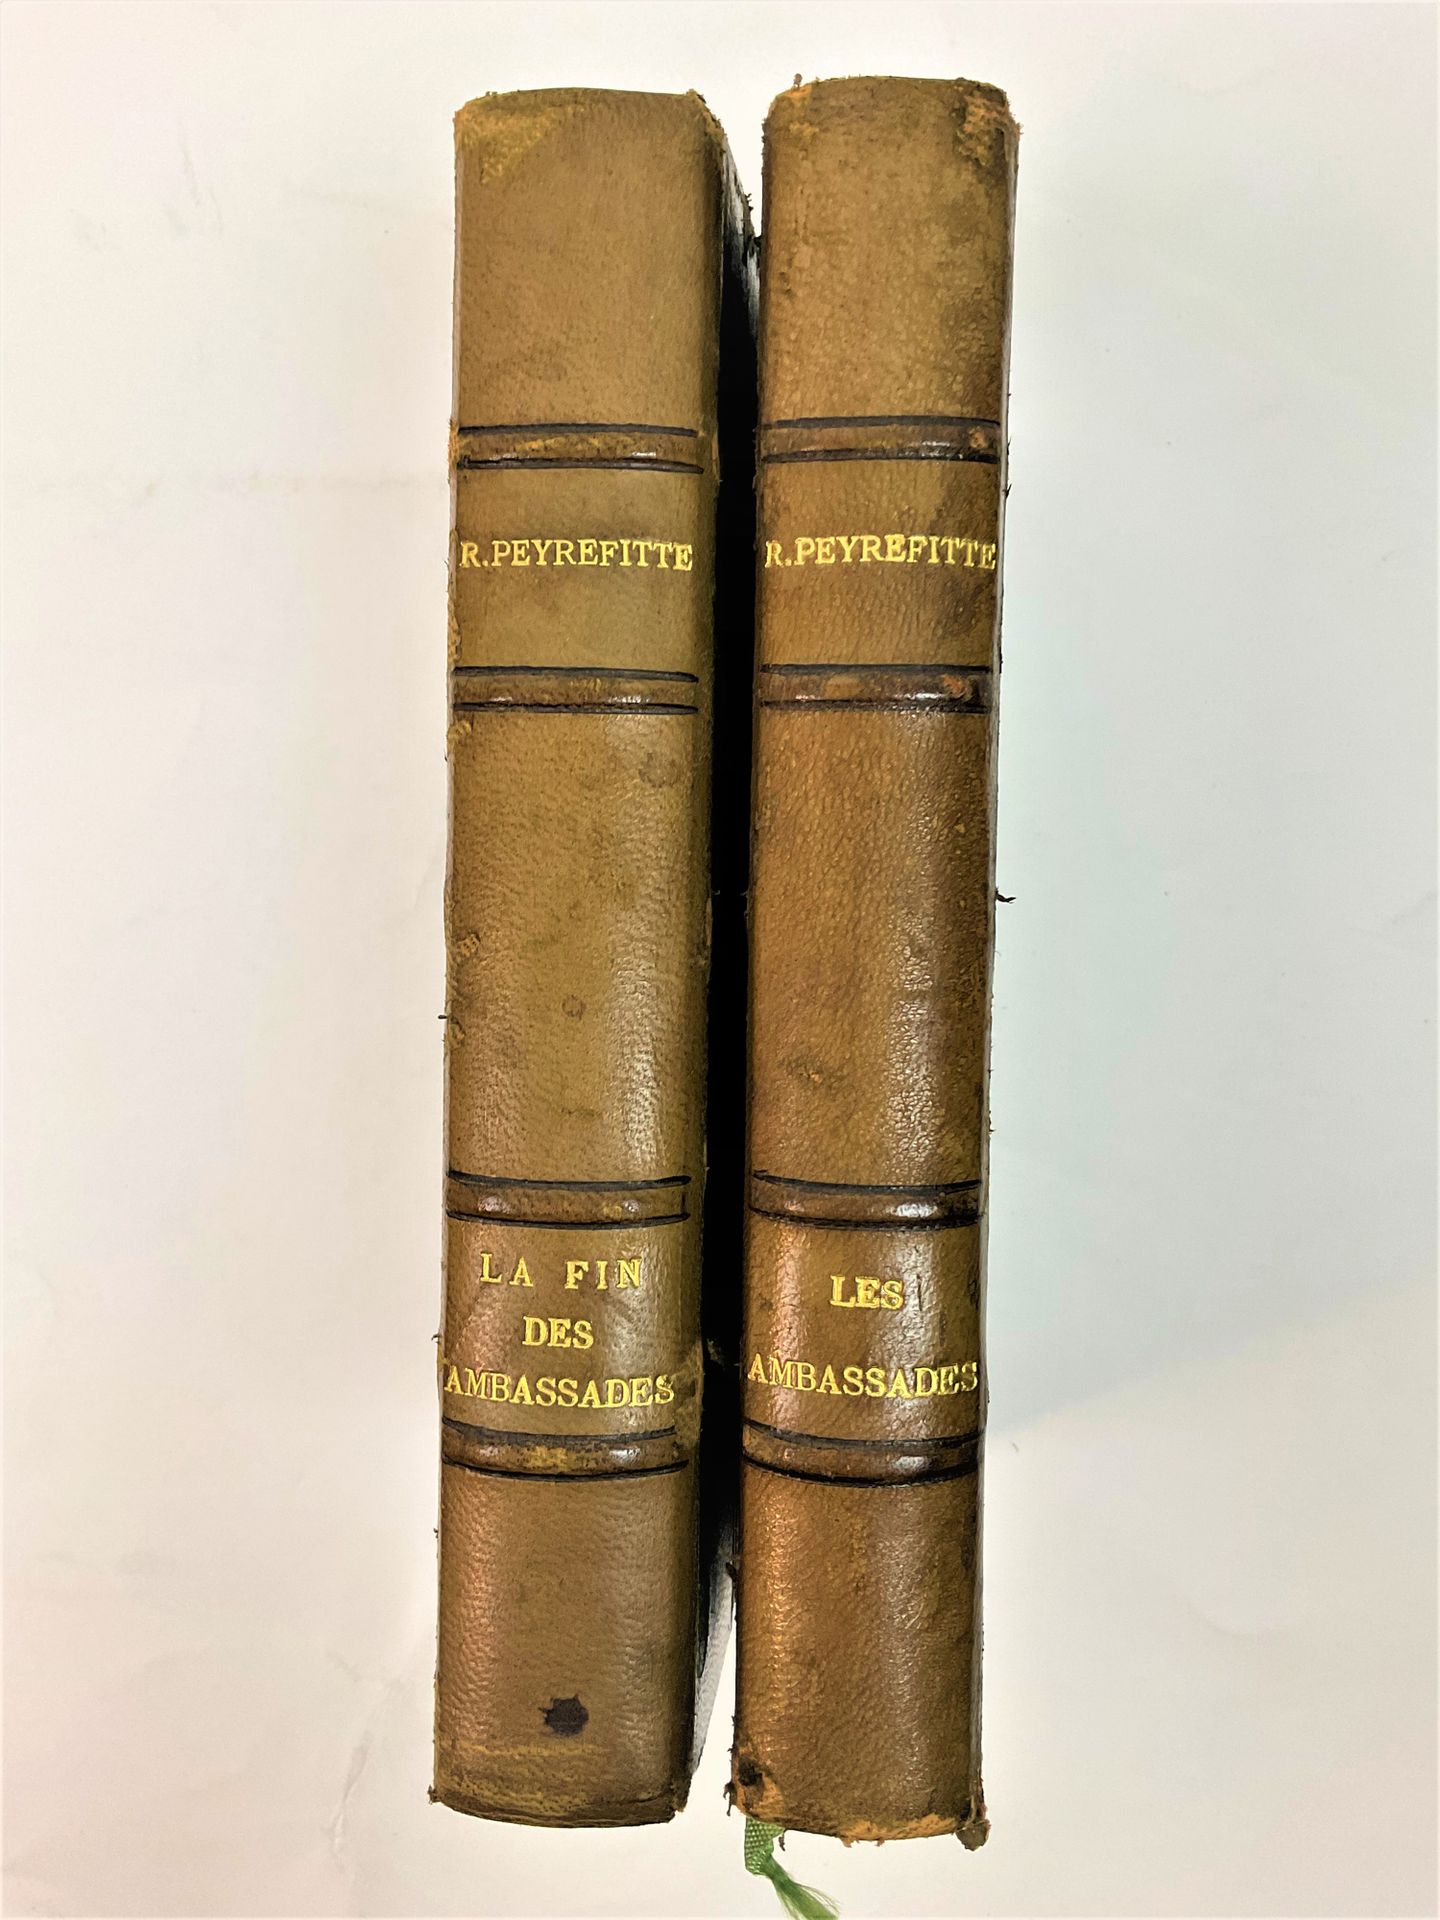 Null Roger PEYREFITTE (1907-2000), writer and diplomat: Suite of 2 volumes: "Les&hellip;